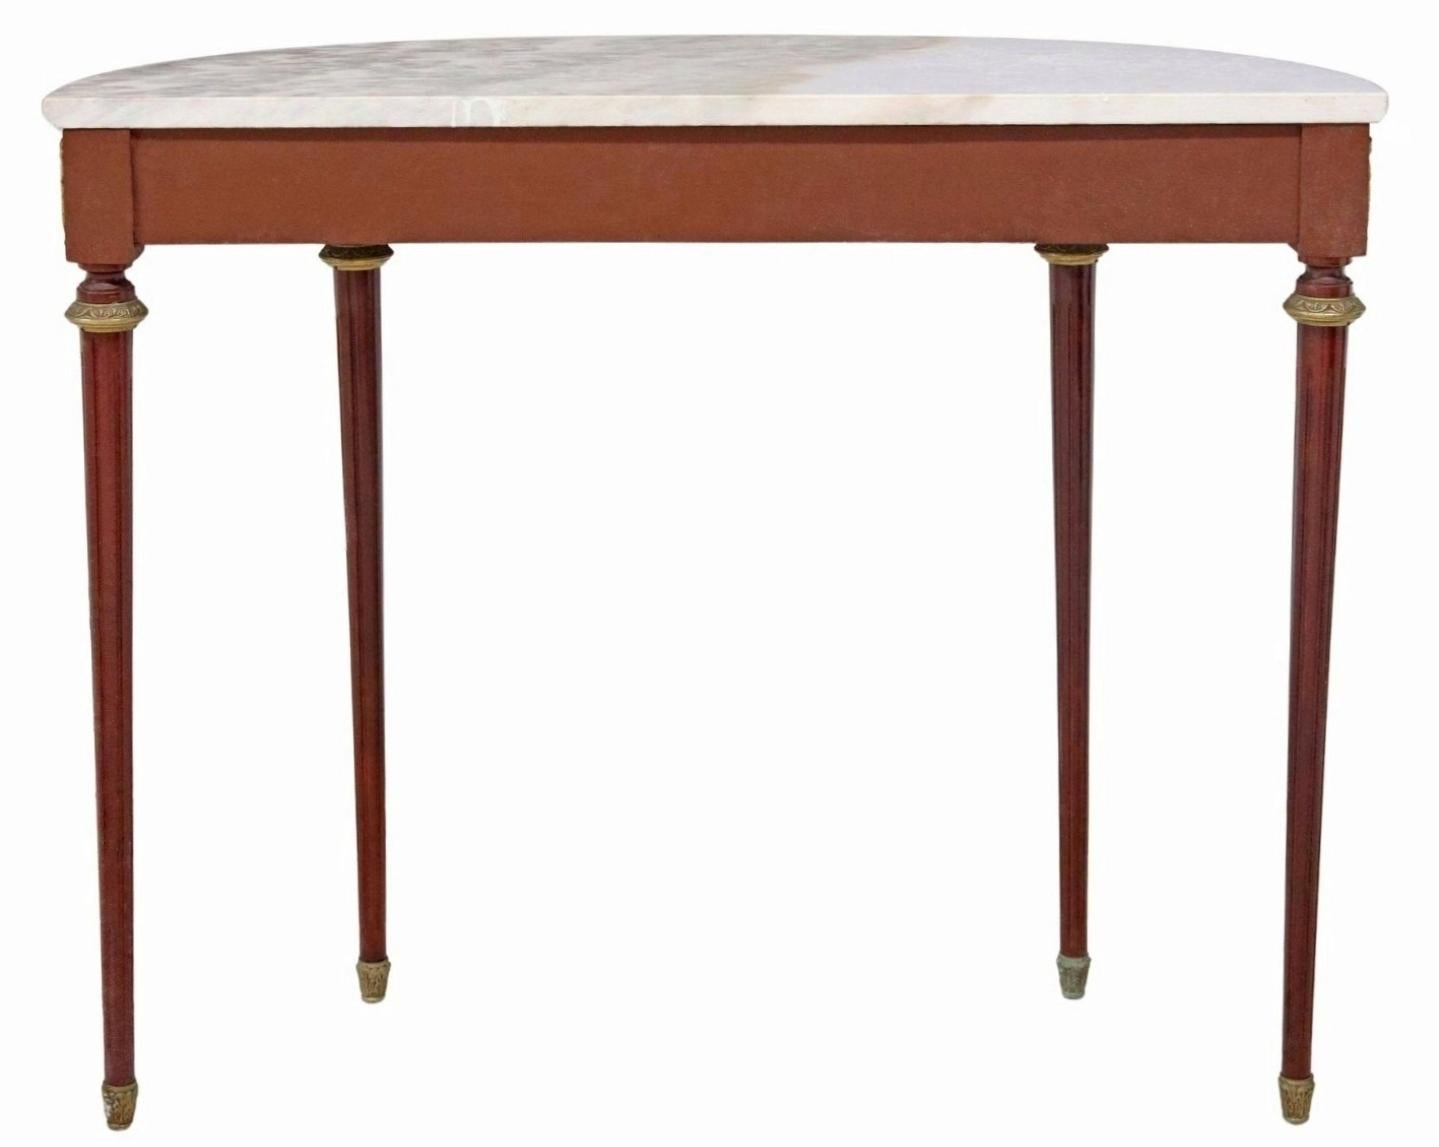 20th Century Fine Louis XVI Revival Console Table by Harry & Lou Epstein For Sale